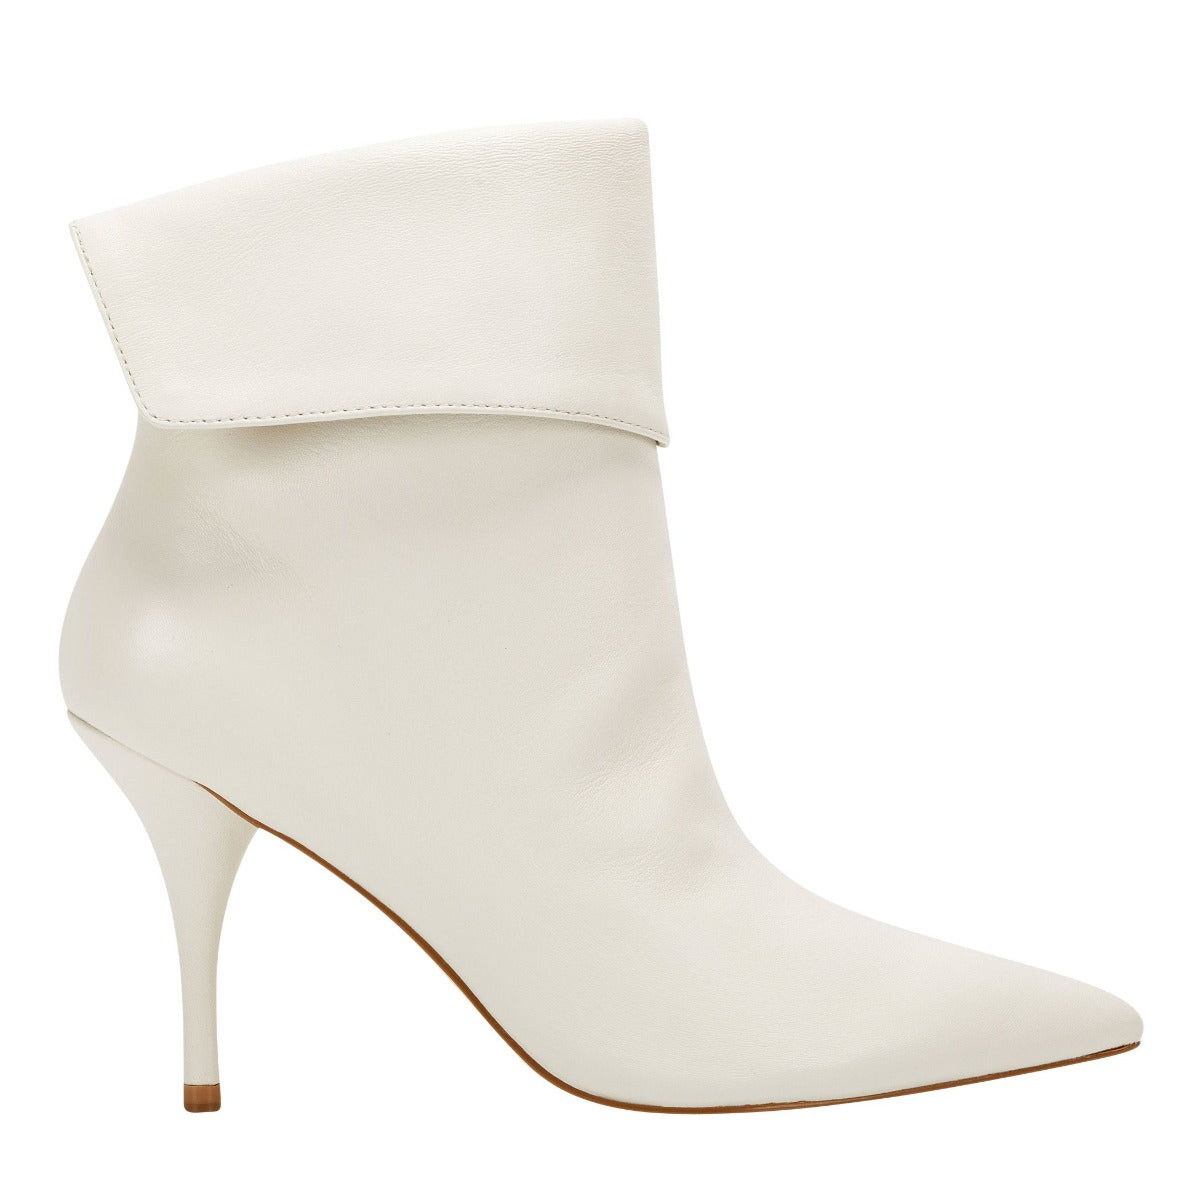 marc fisher pointy toe bootie